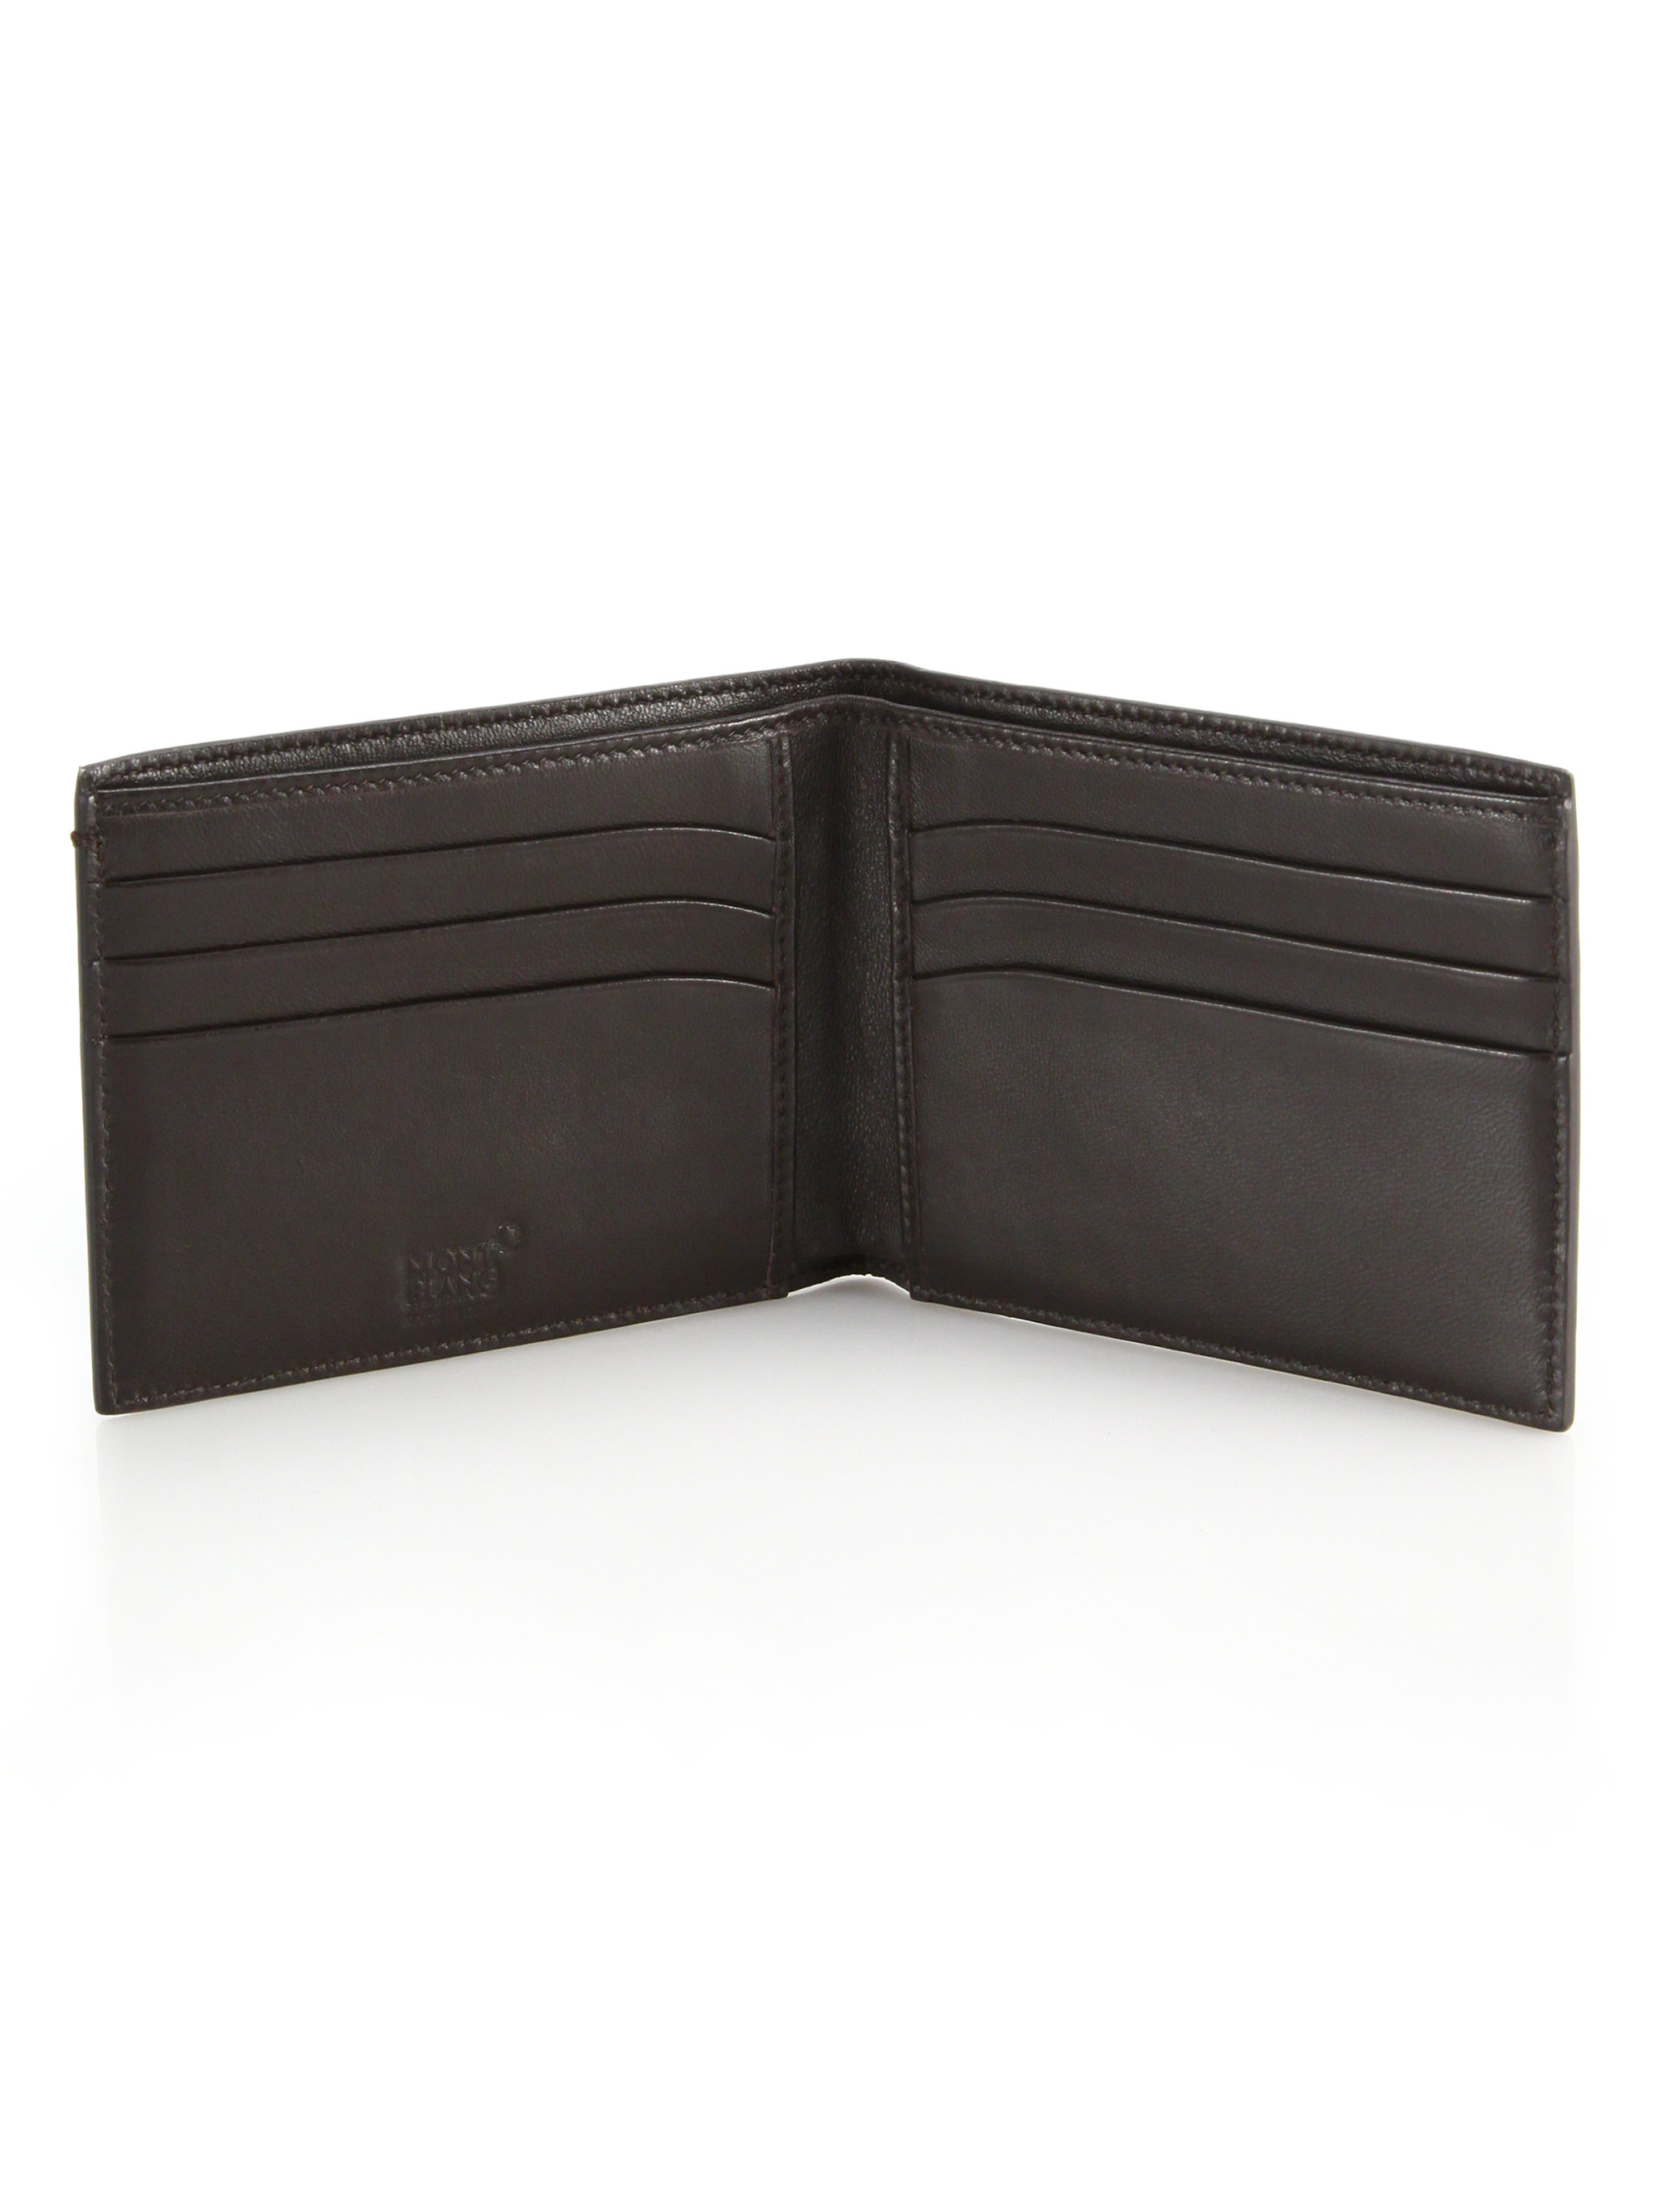 Lyst - Montblanc Italian Leather Wallet in Brown for Men